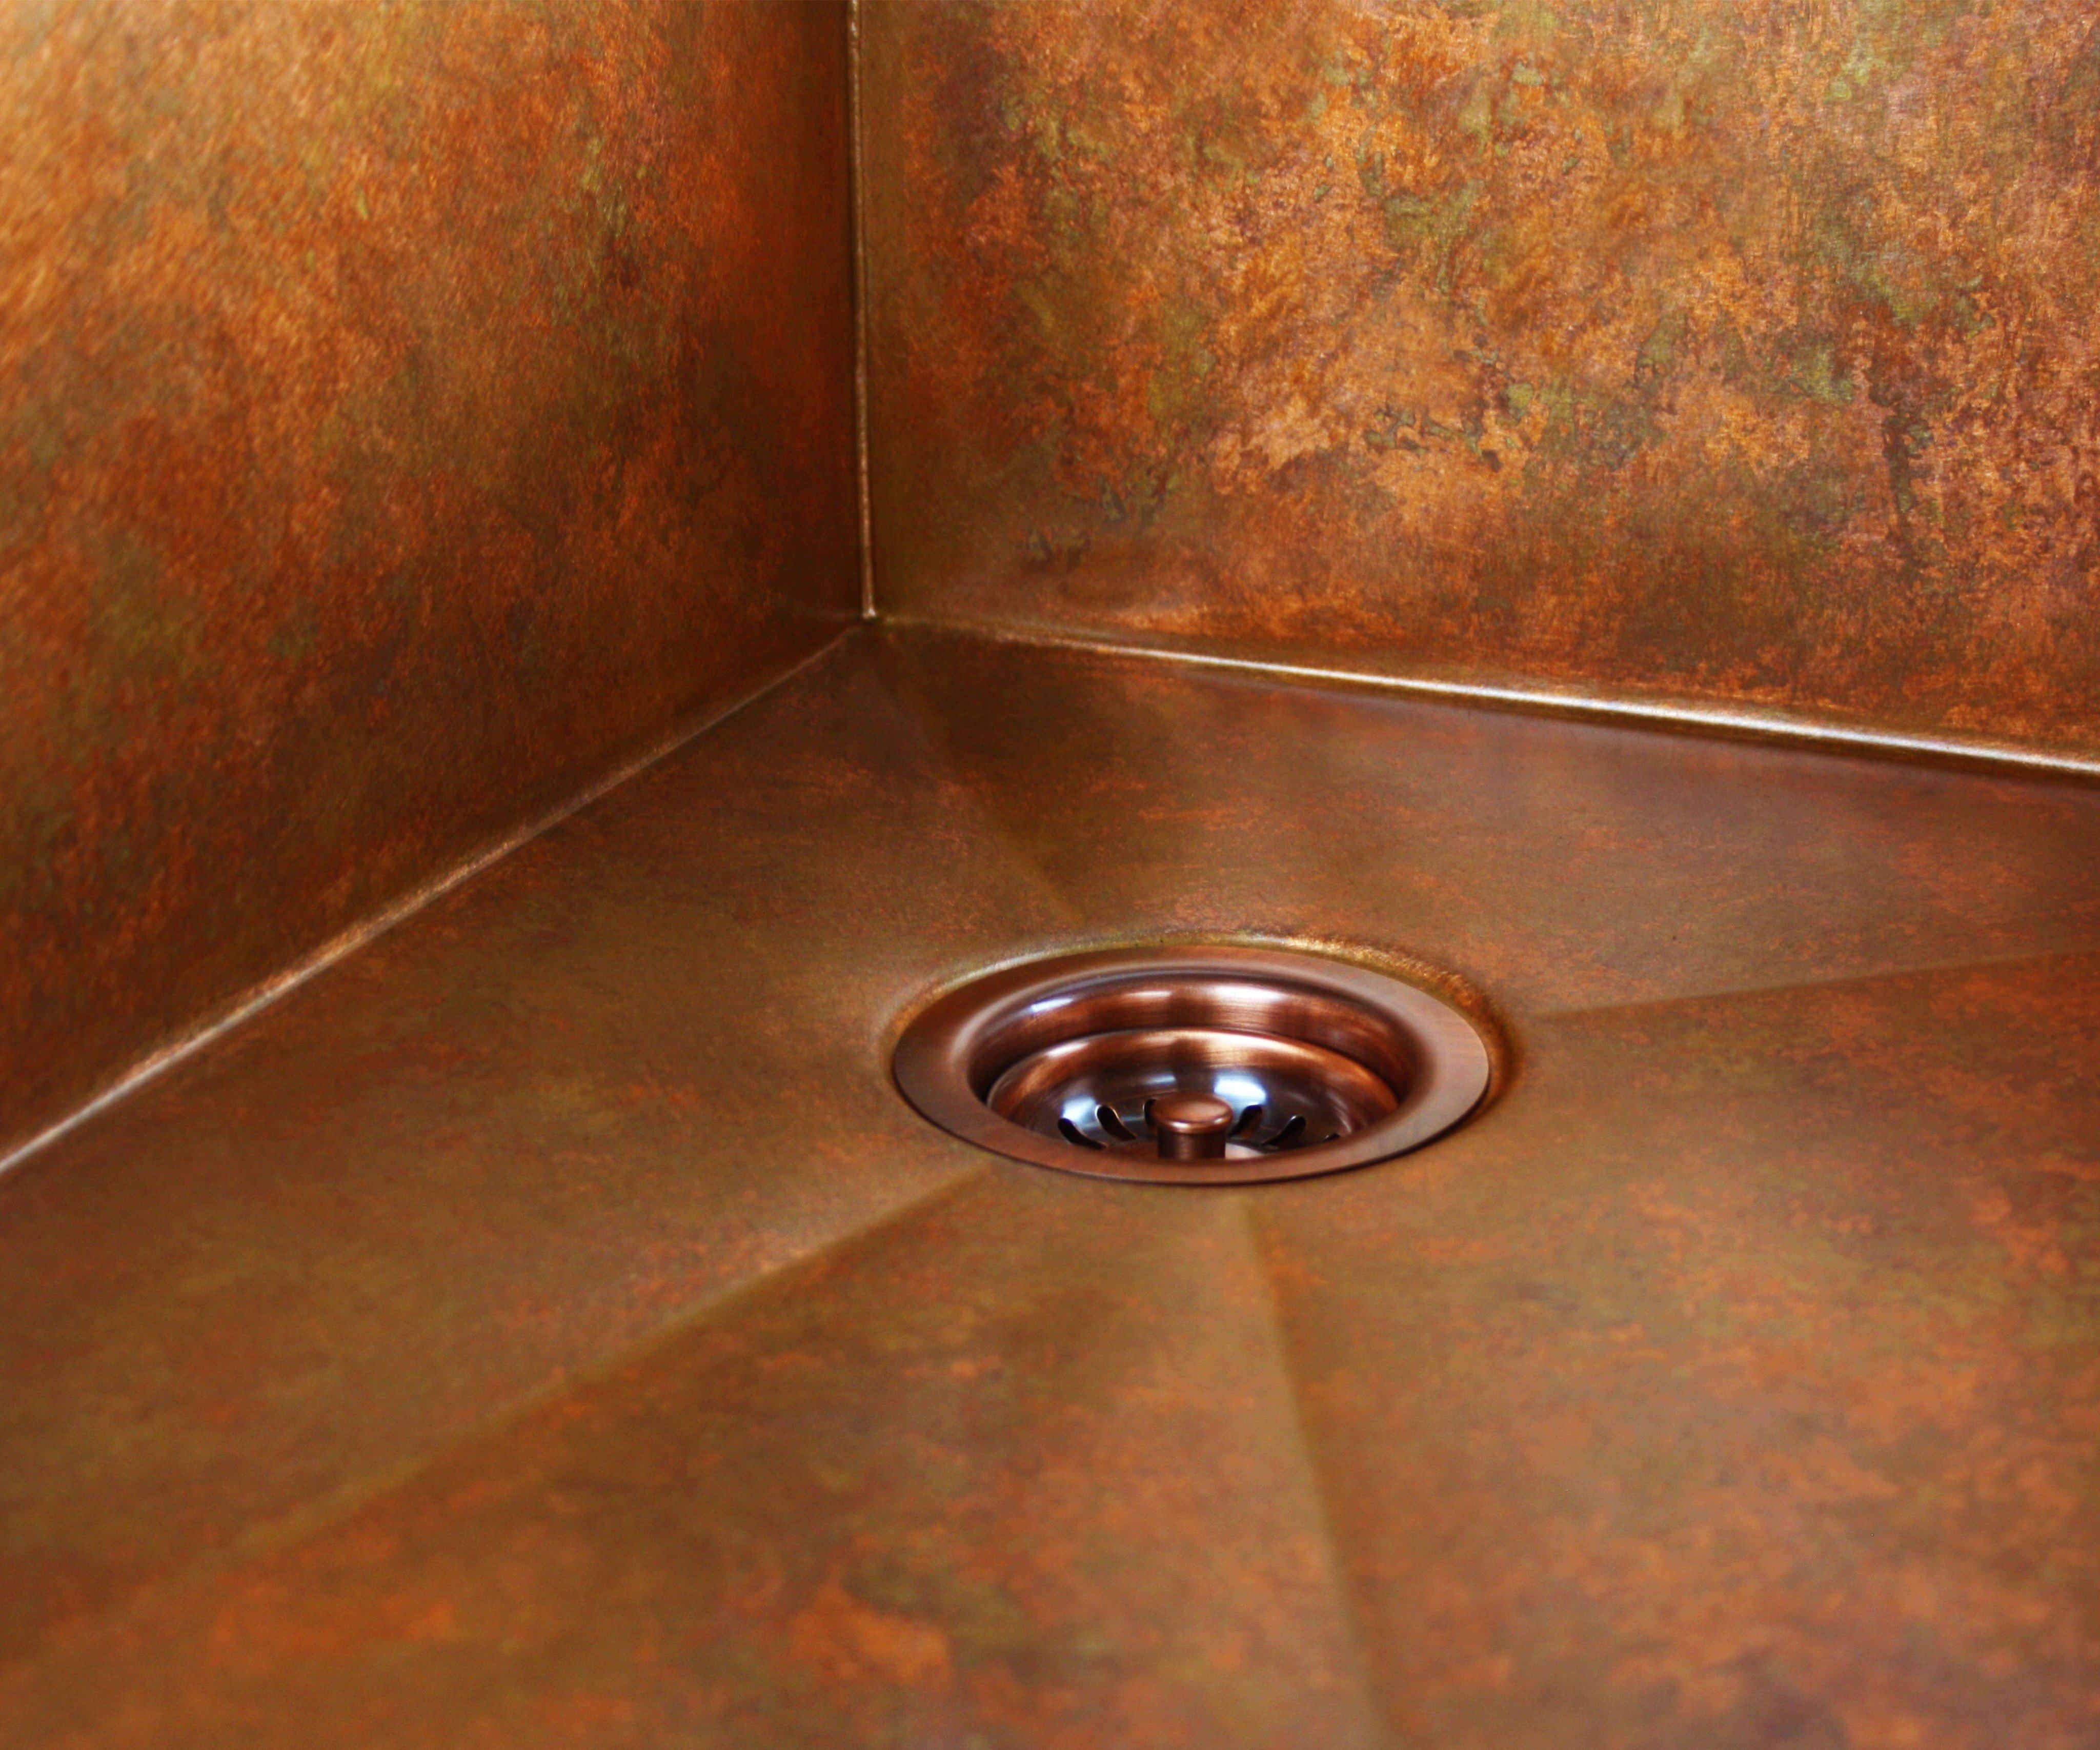 Havens weathered copper sink with disposal drain placed in the right rear of sink